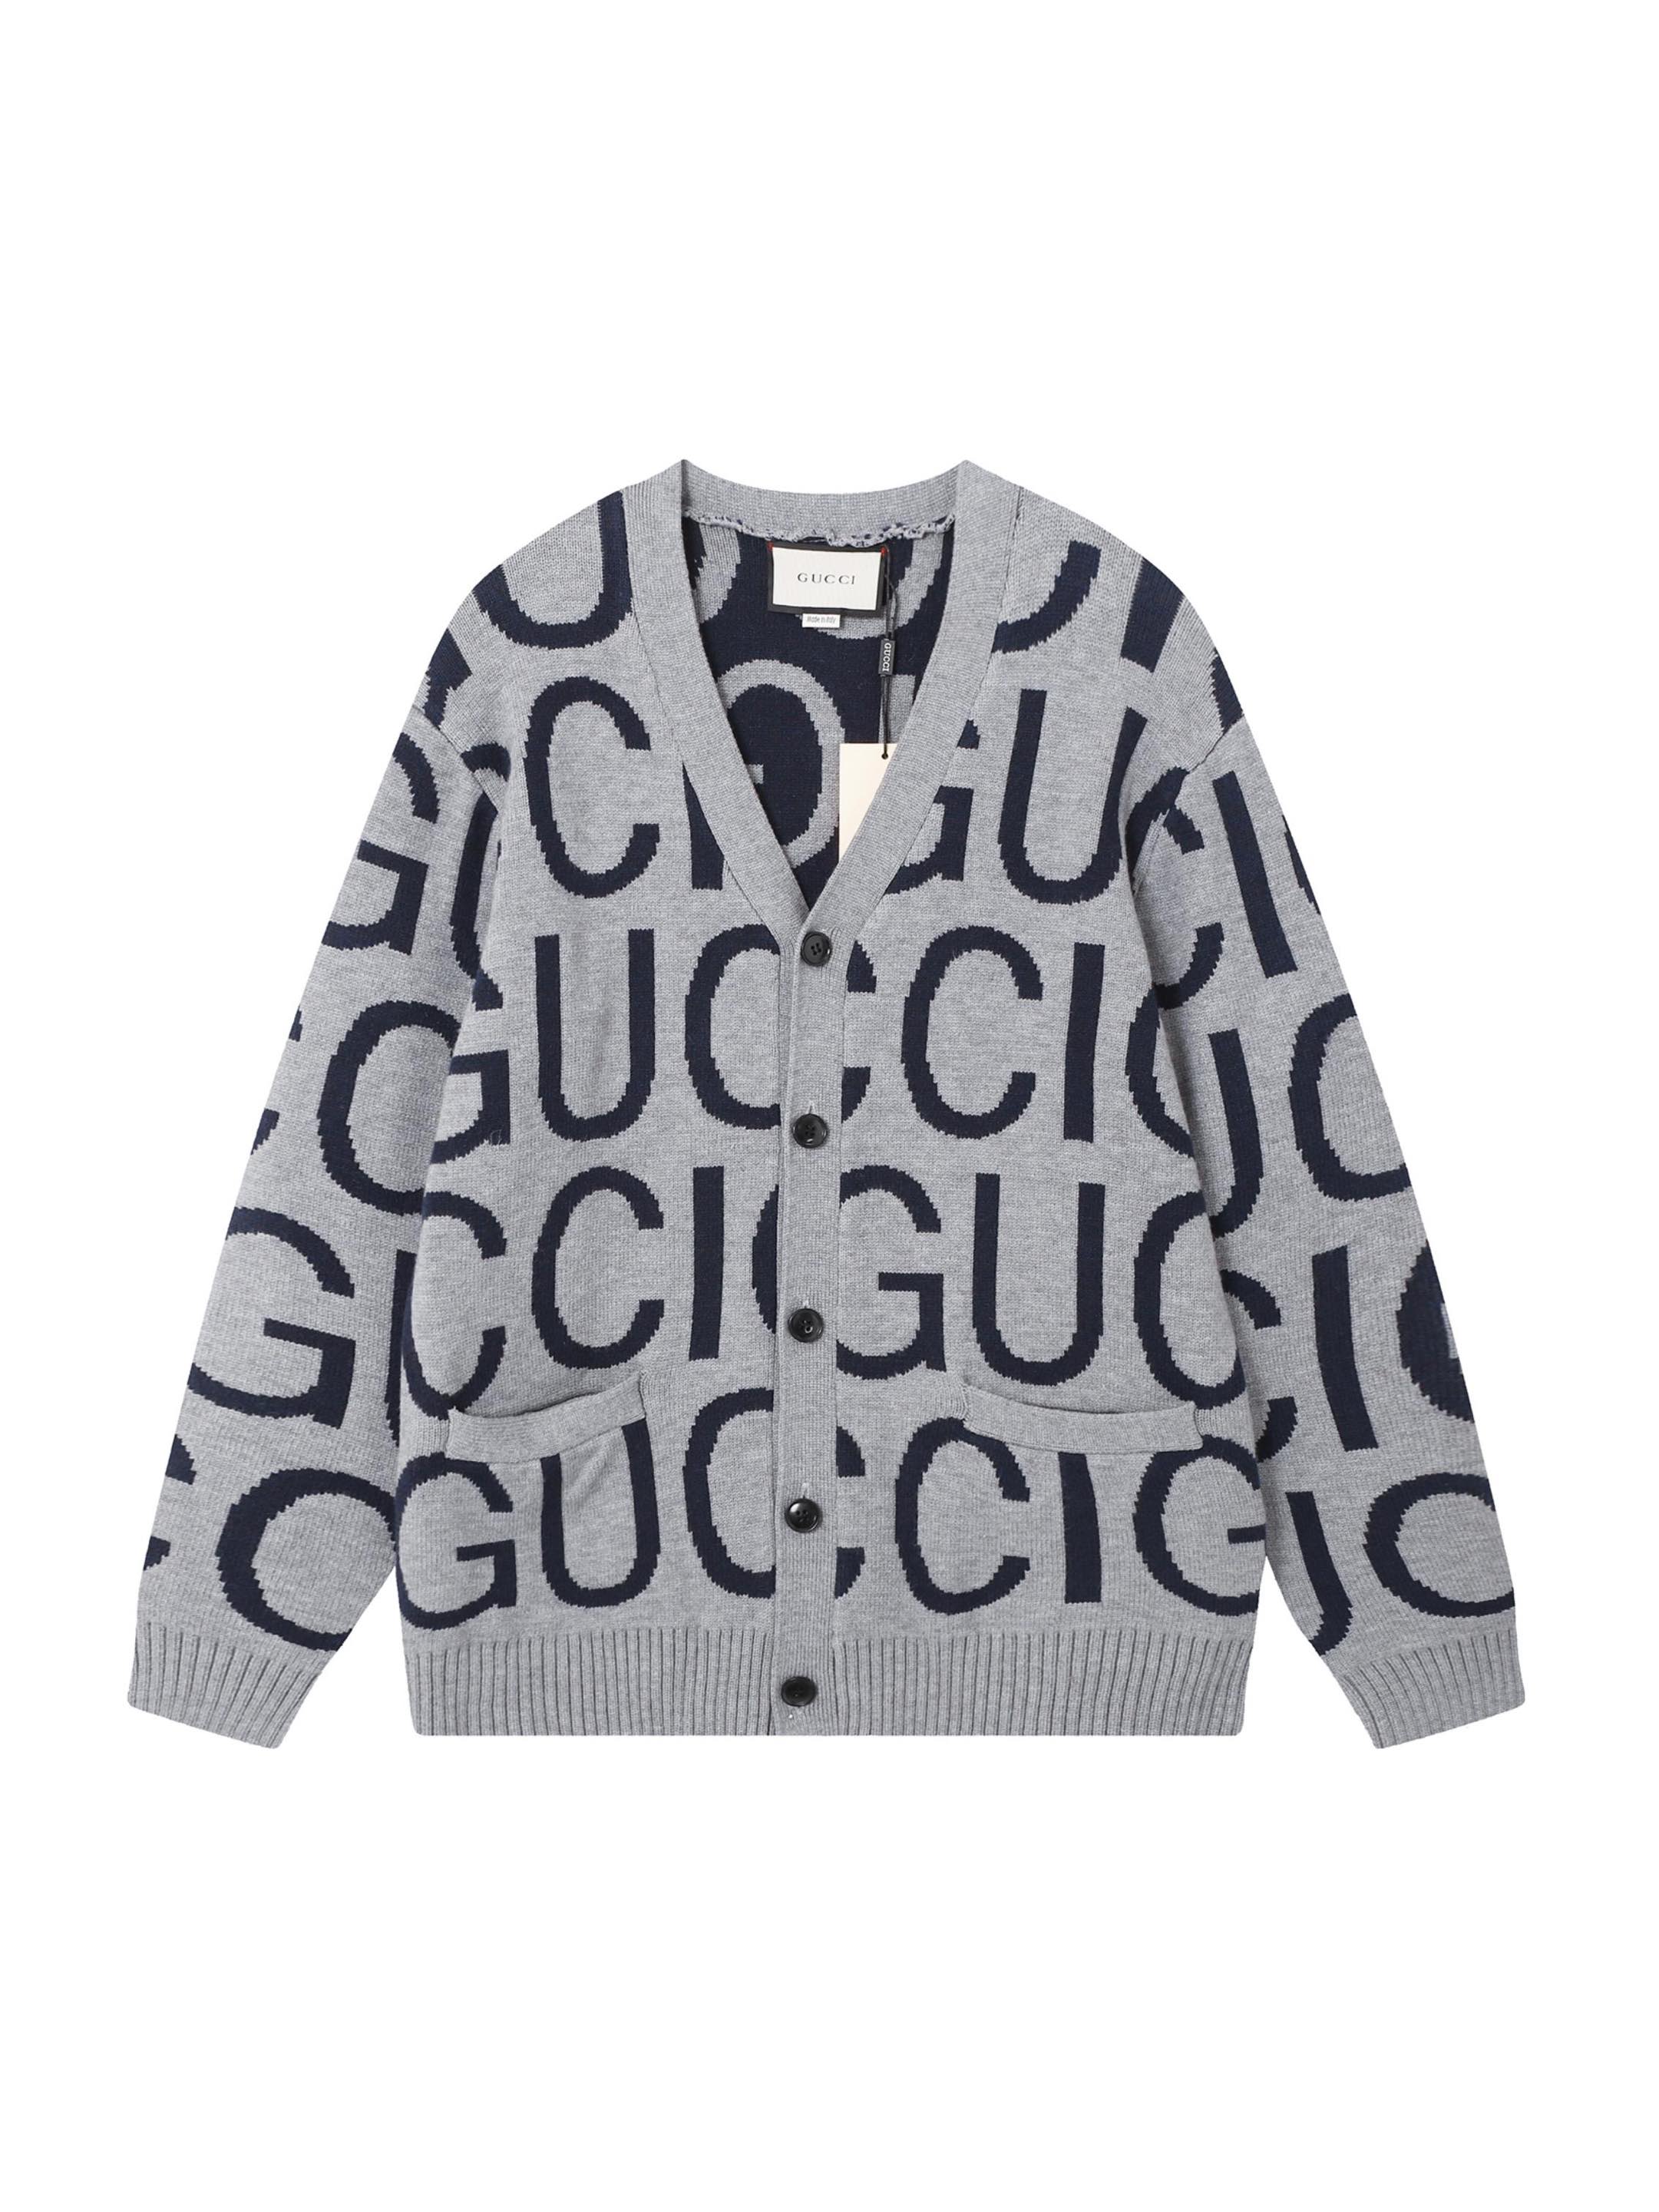 Gucci Clothing Cardigans Knit Sweater Grey Knitting Wool Spring Collection Fashion